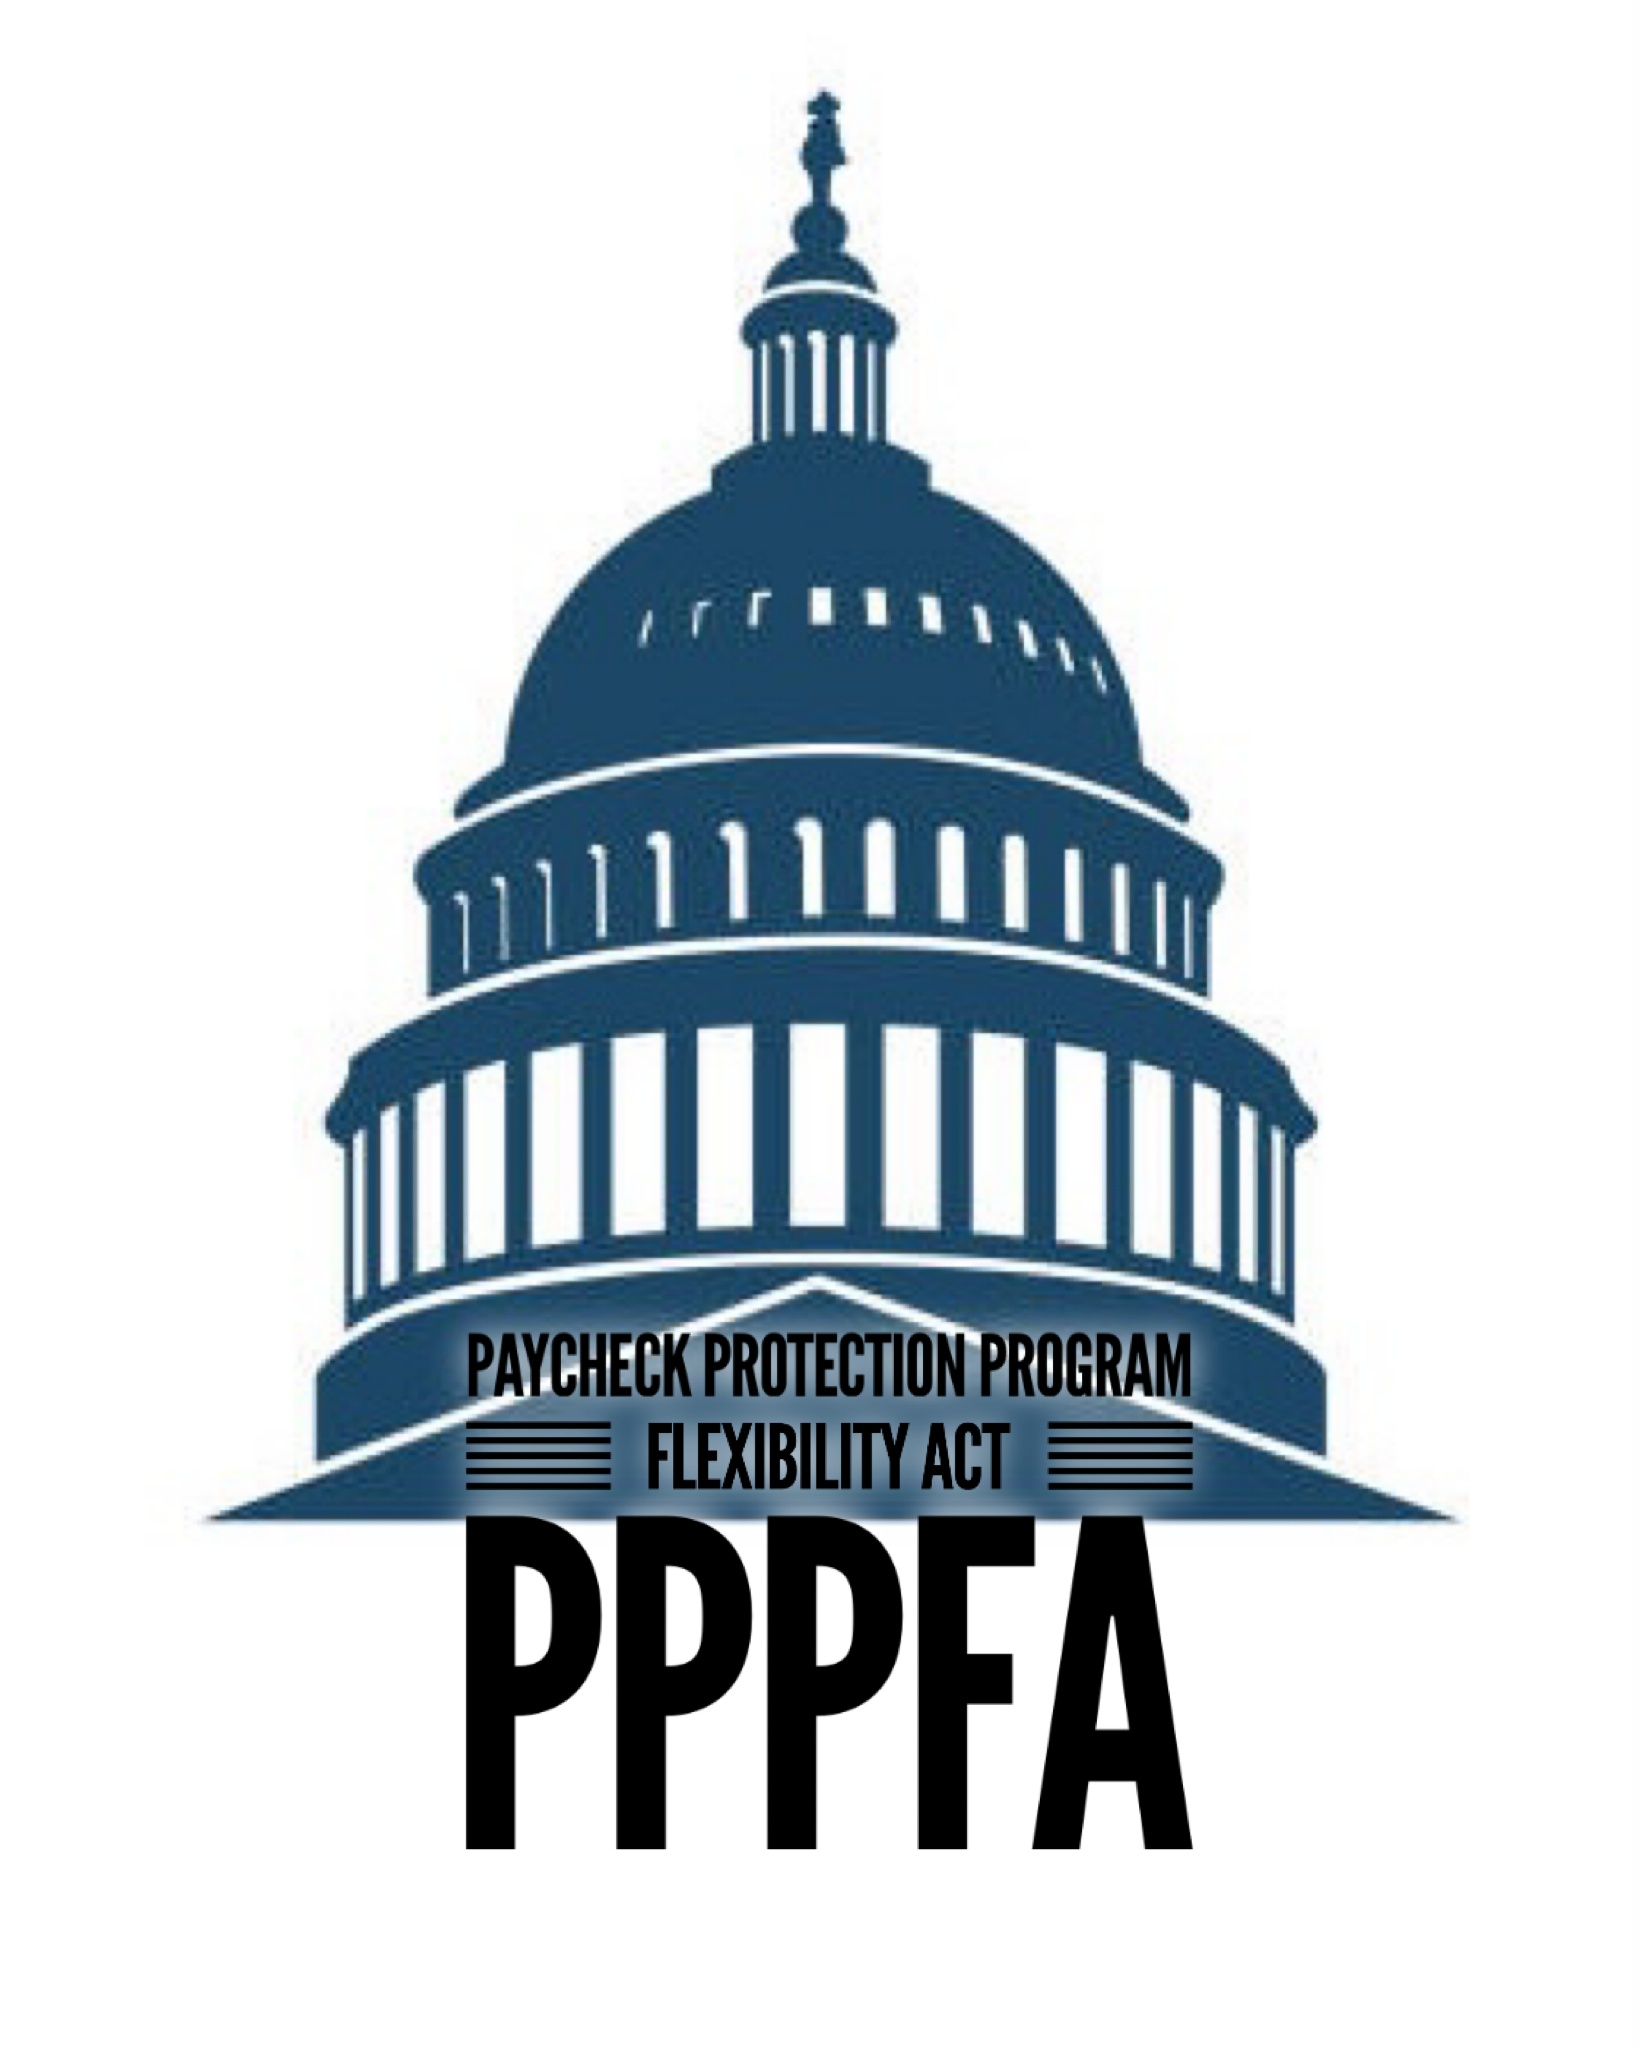 The Paycheck Protection Program Flexibility Act (PPPFA)